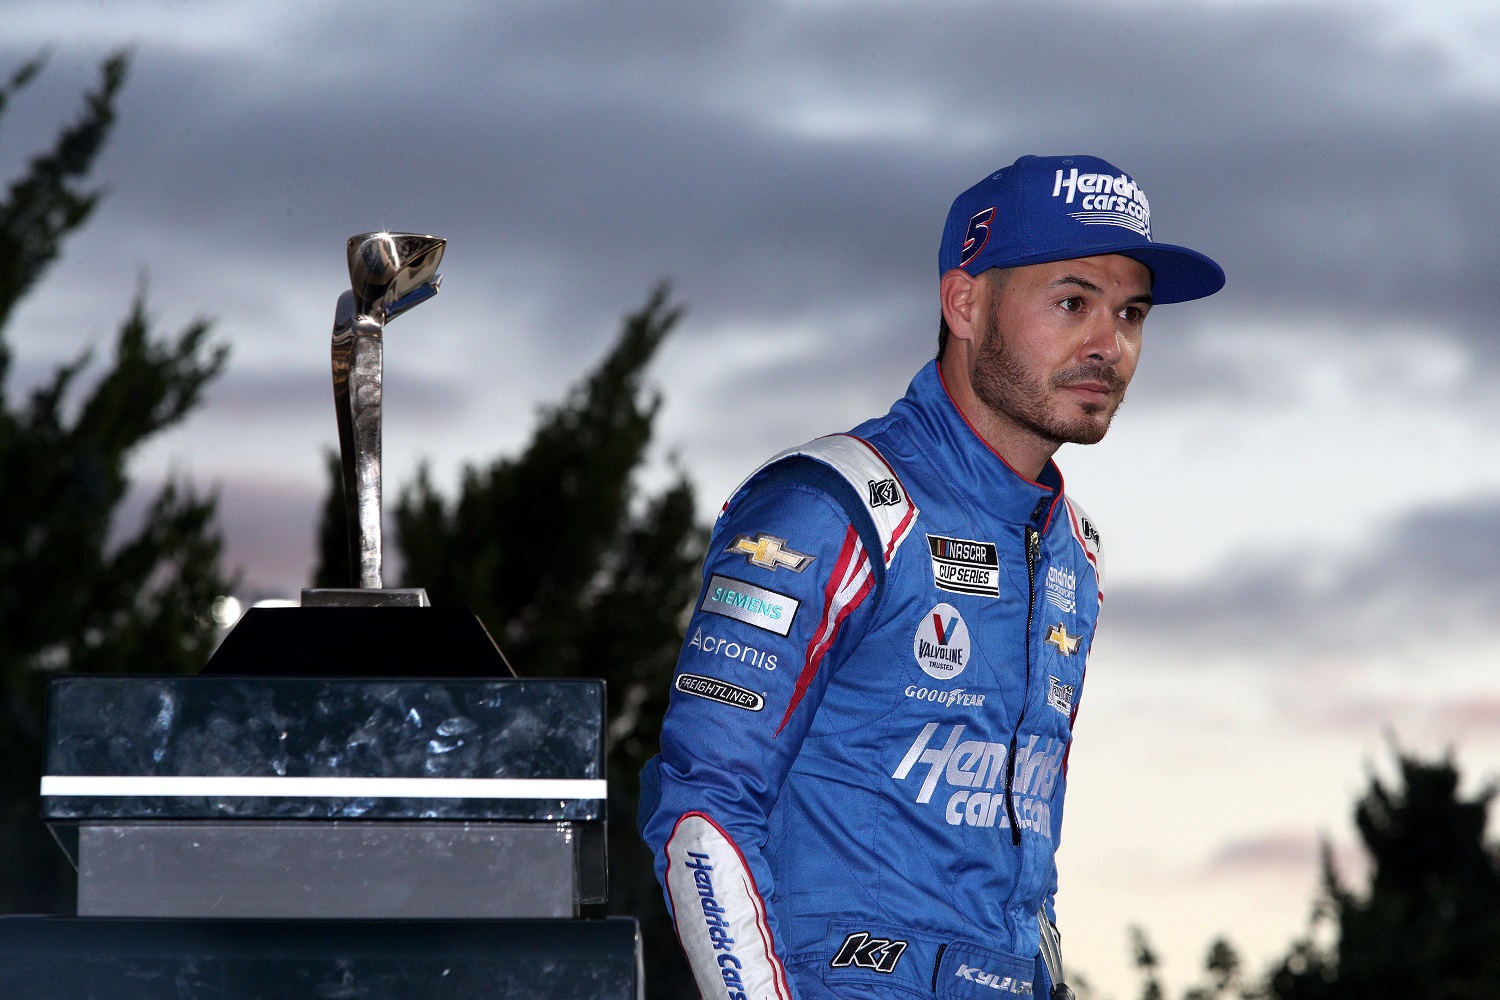 Kyle Larson, driver of the No. 5 Chevy, looks on from victory lane after winning the NASCAR Cup Series Hollywood Casino 400 at Kansas Speedway on Oct. 24, 2021. | Sean Gardner/Getty Images